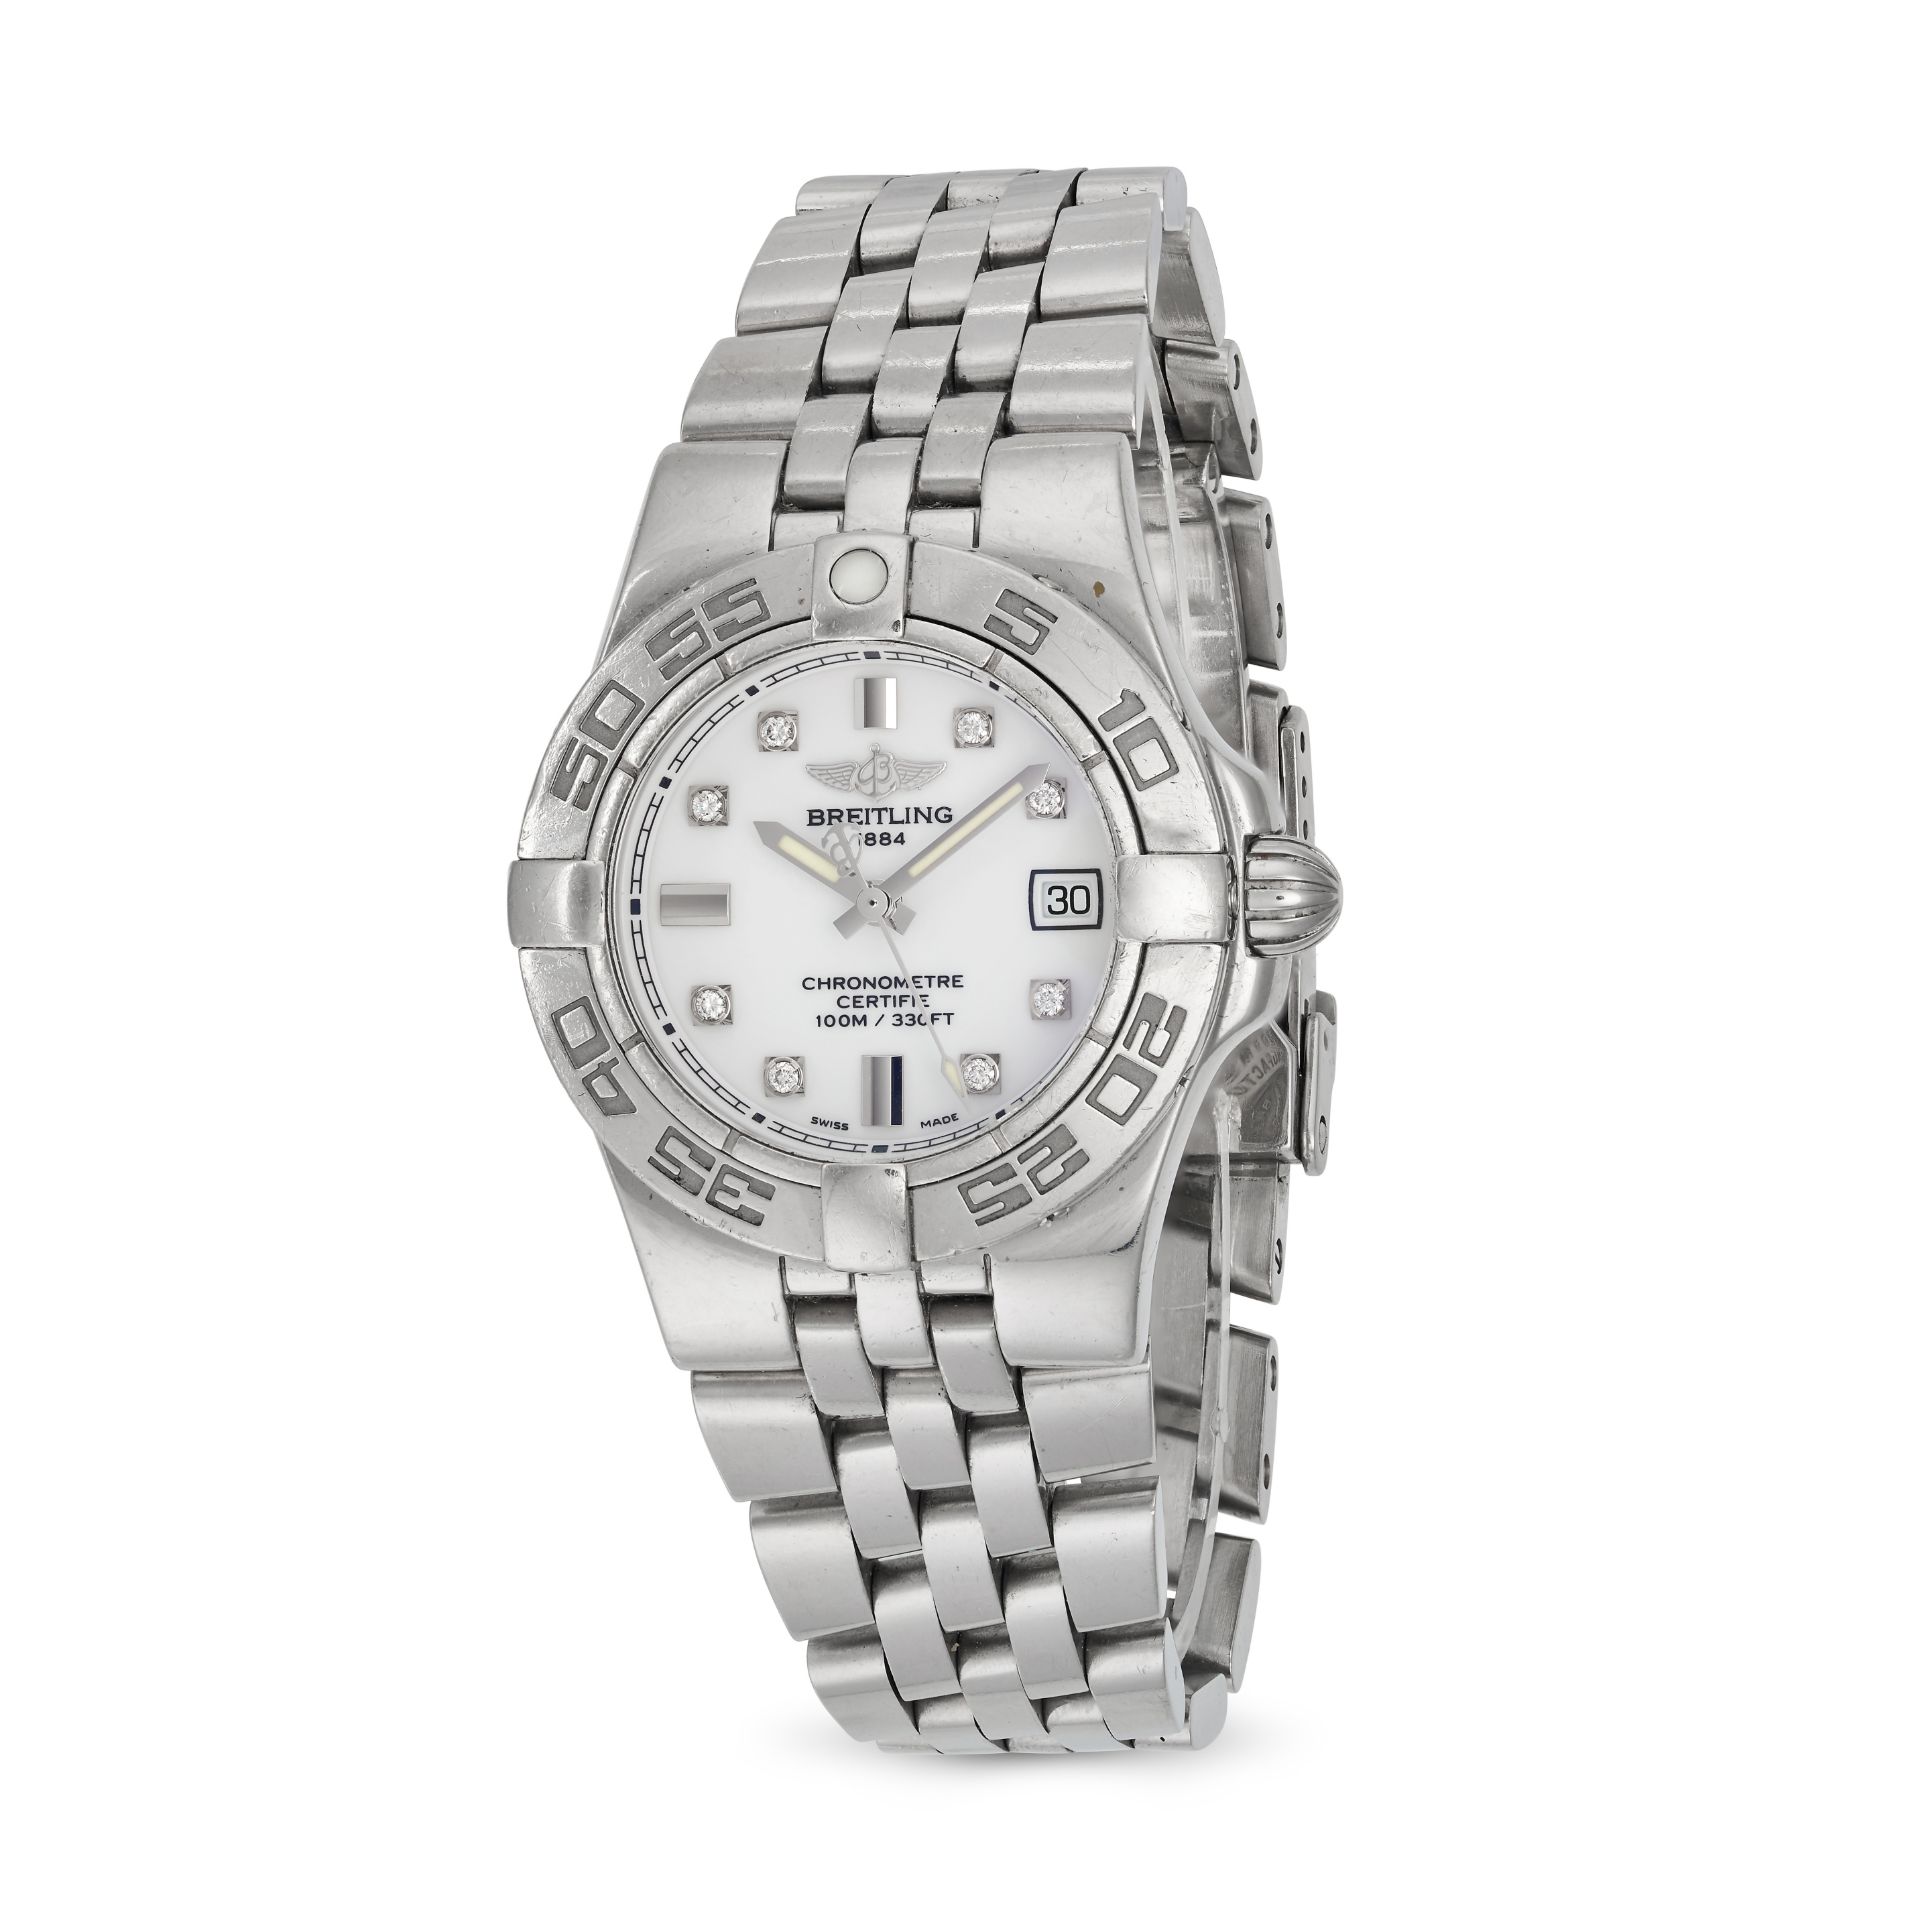 BREITLING - A BREITLING GALACTIC 30 WRISTWATCH in stainless steel, A71340, the circular white dia...